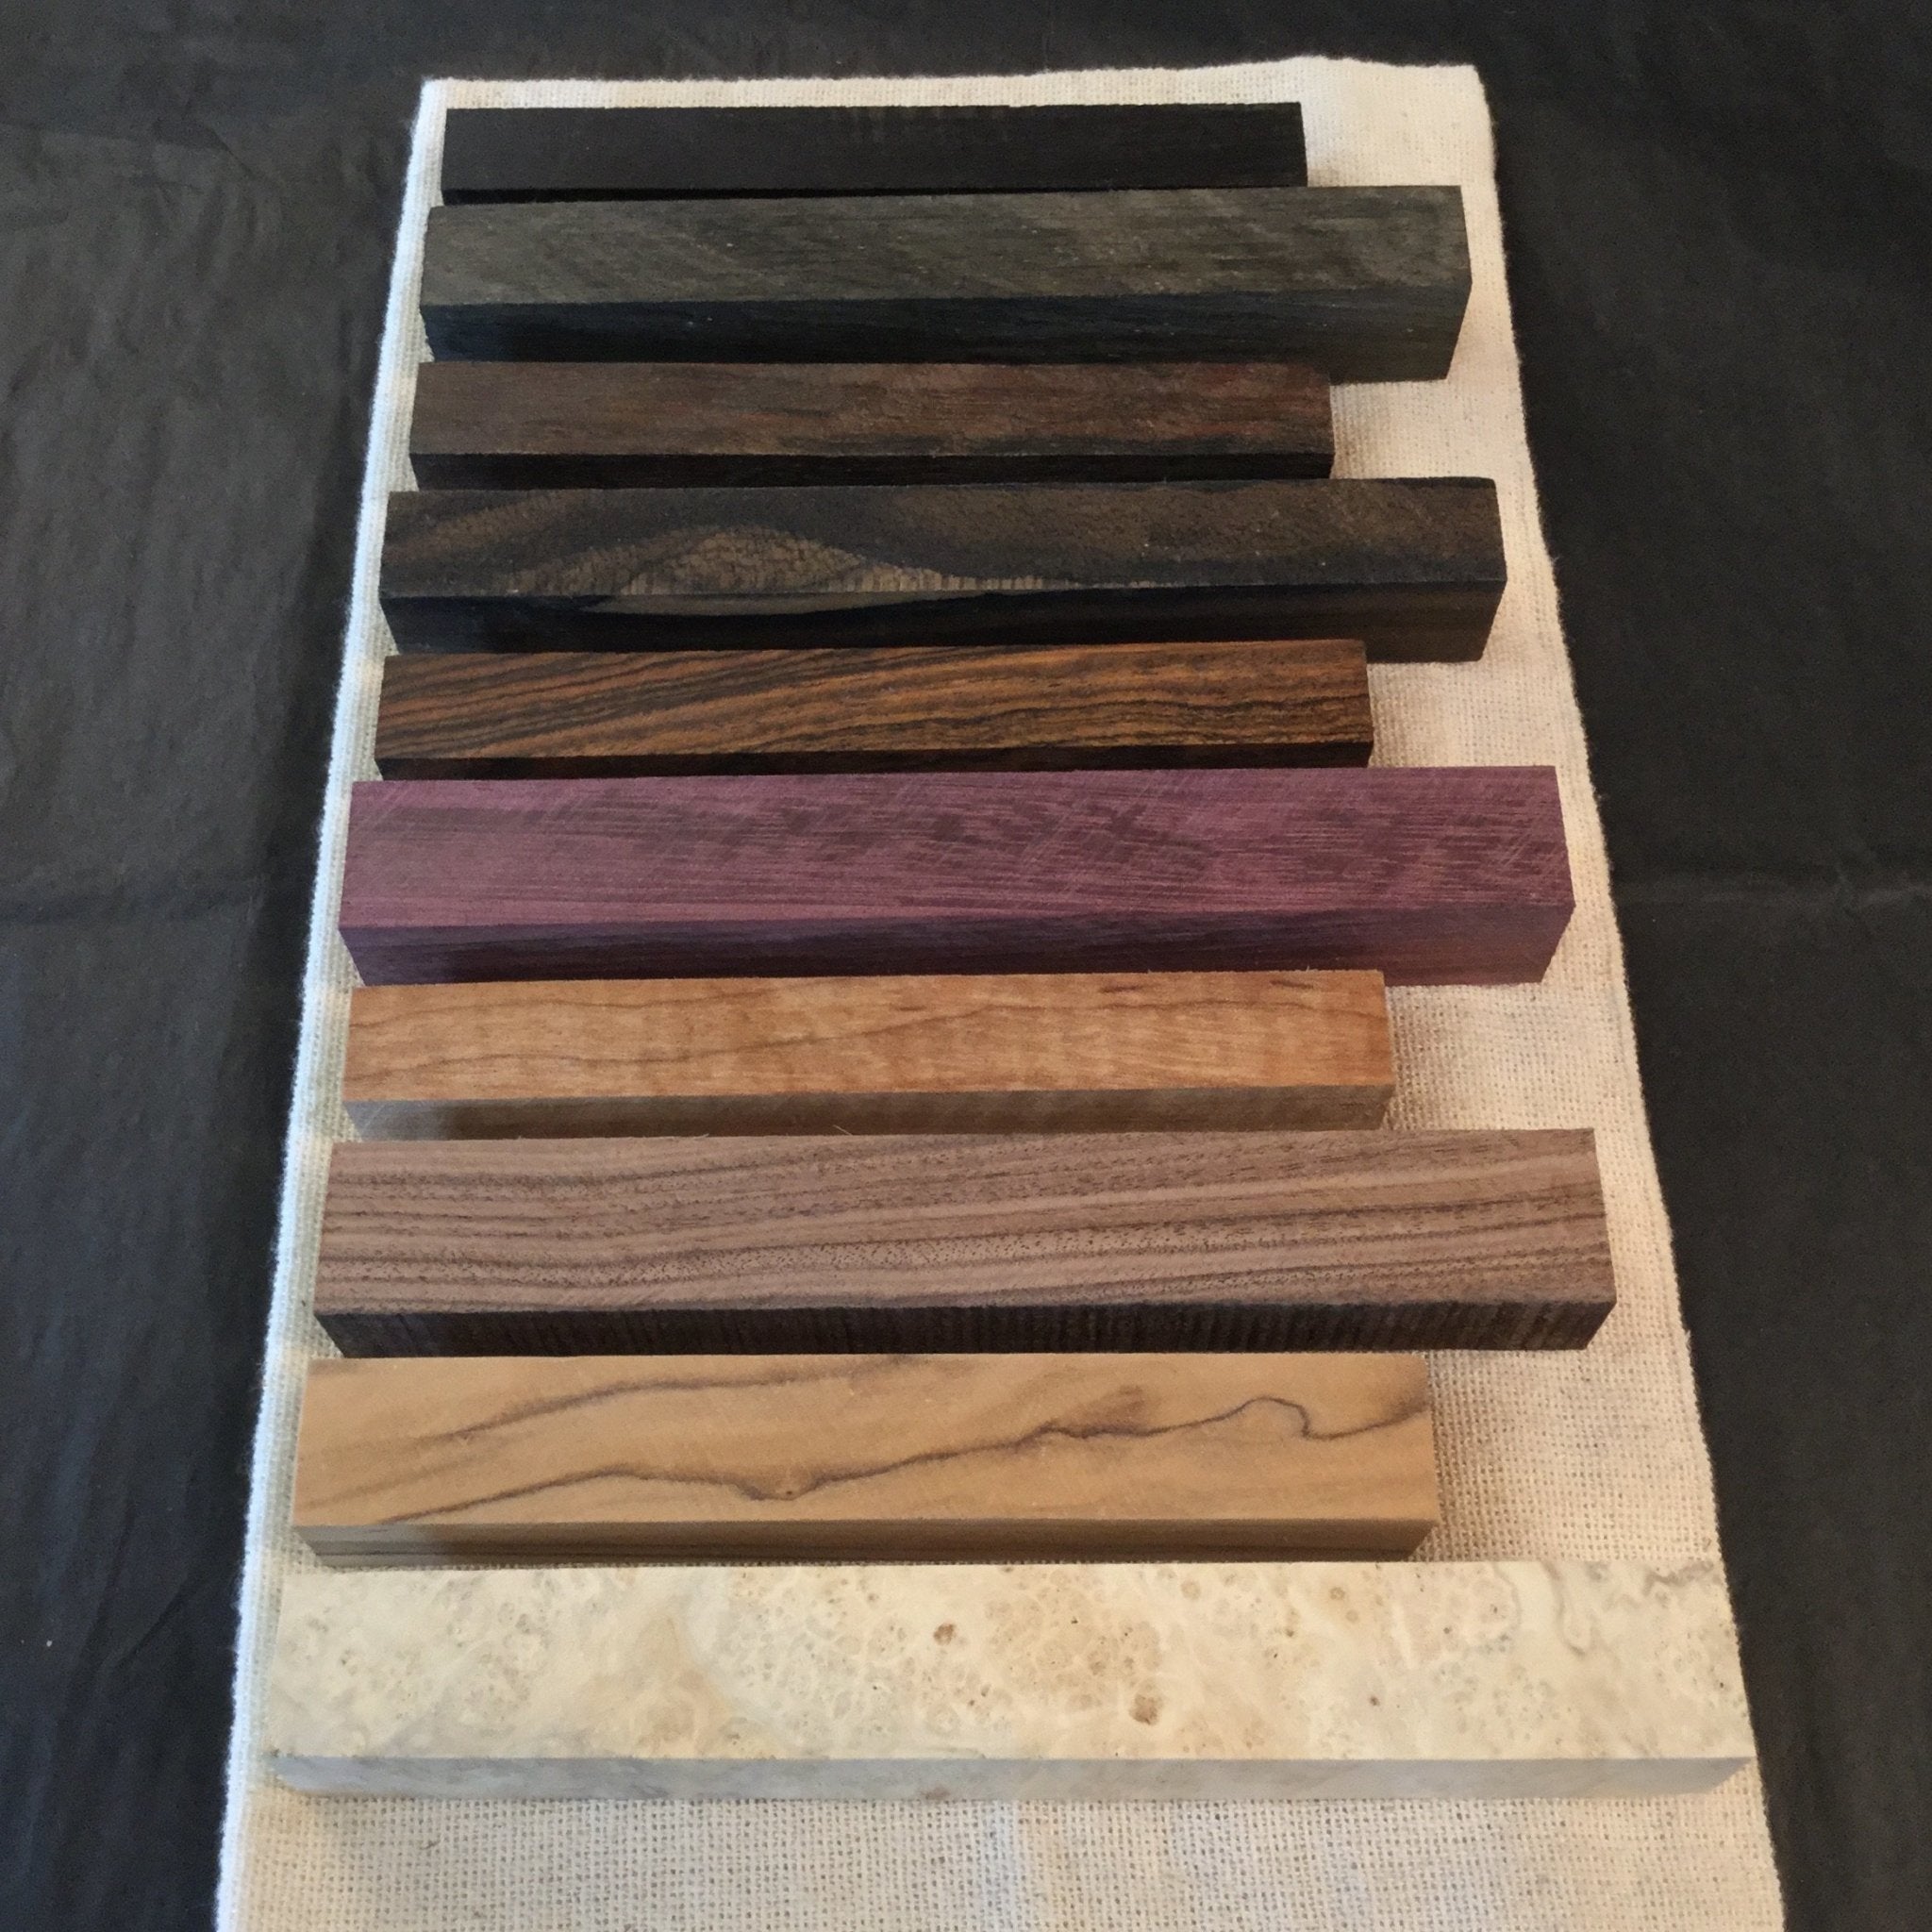 ZIRICOTE Wood Blanks, for Pen making, Crafting, Woodworking, Turning.